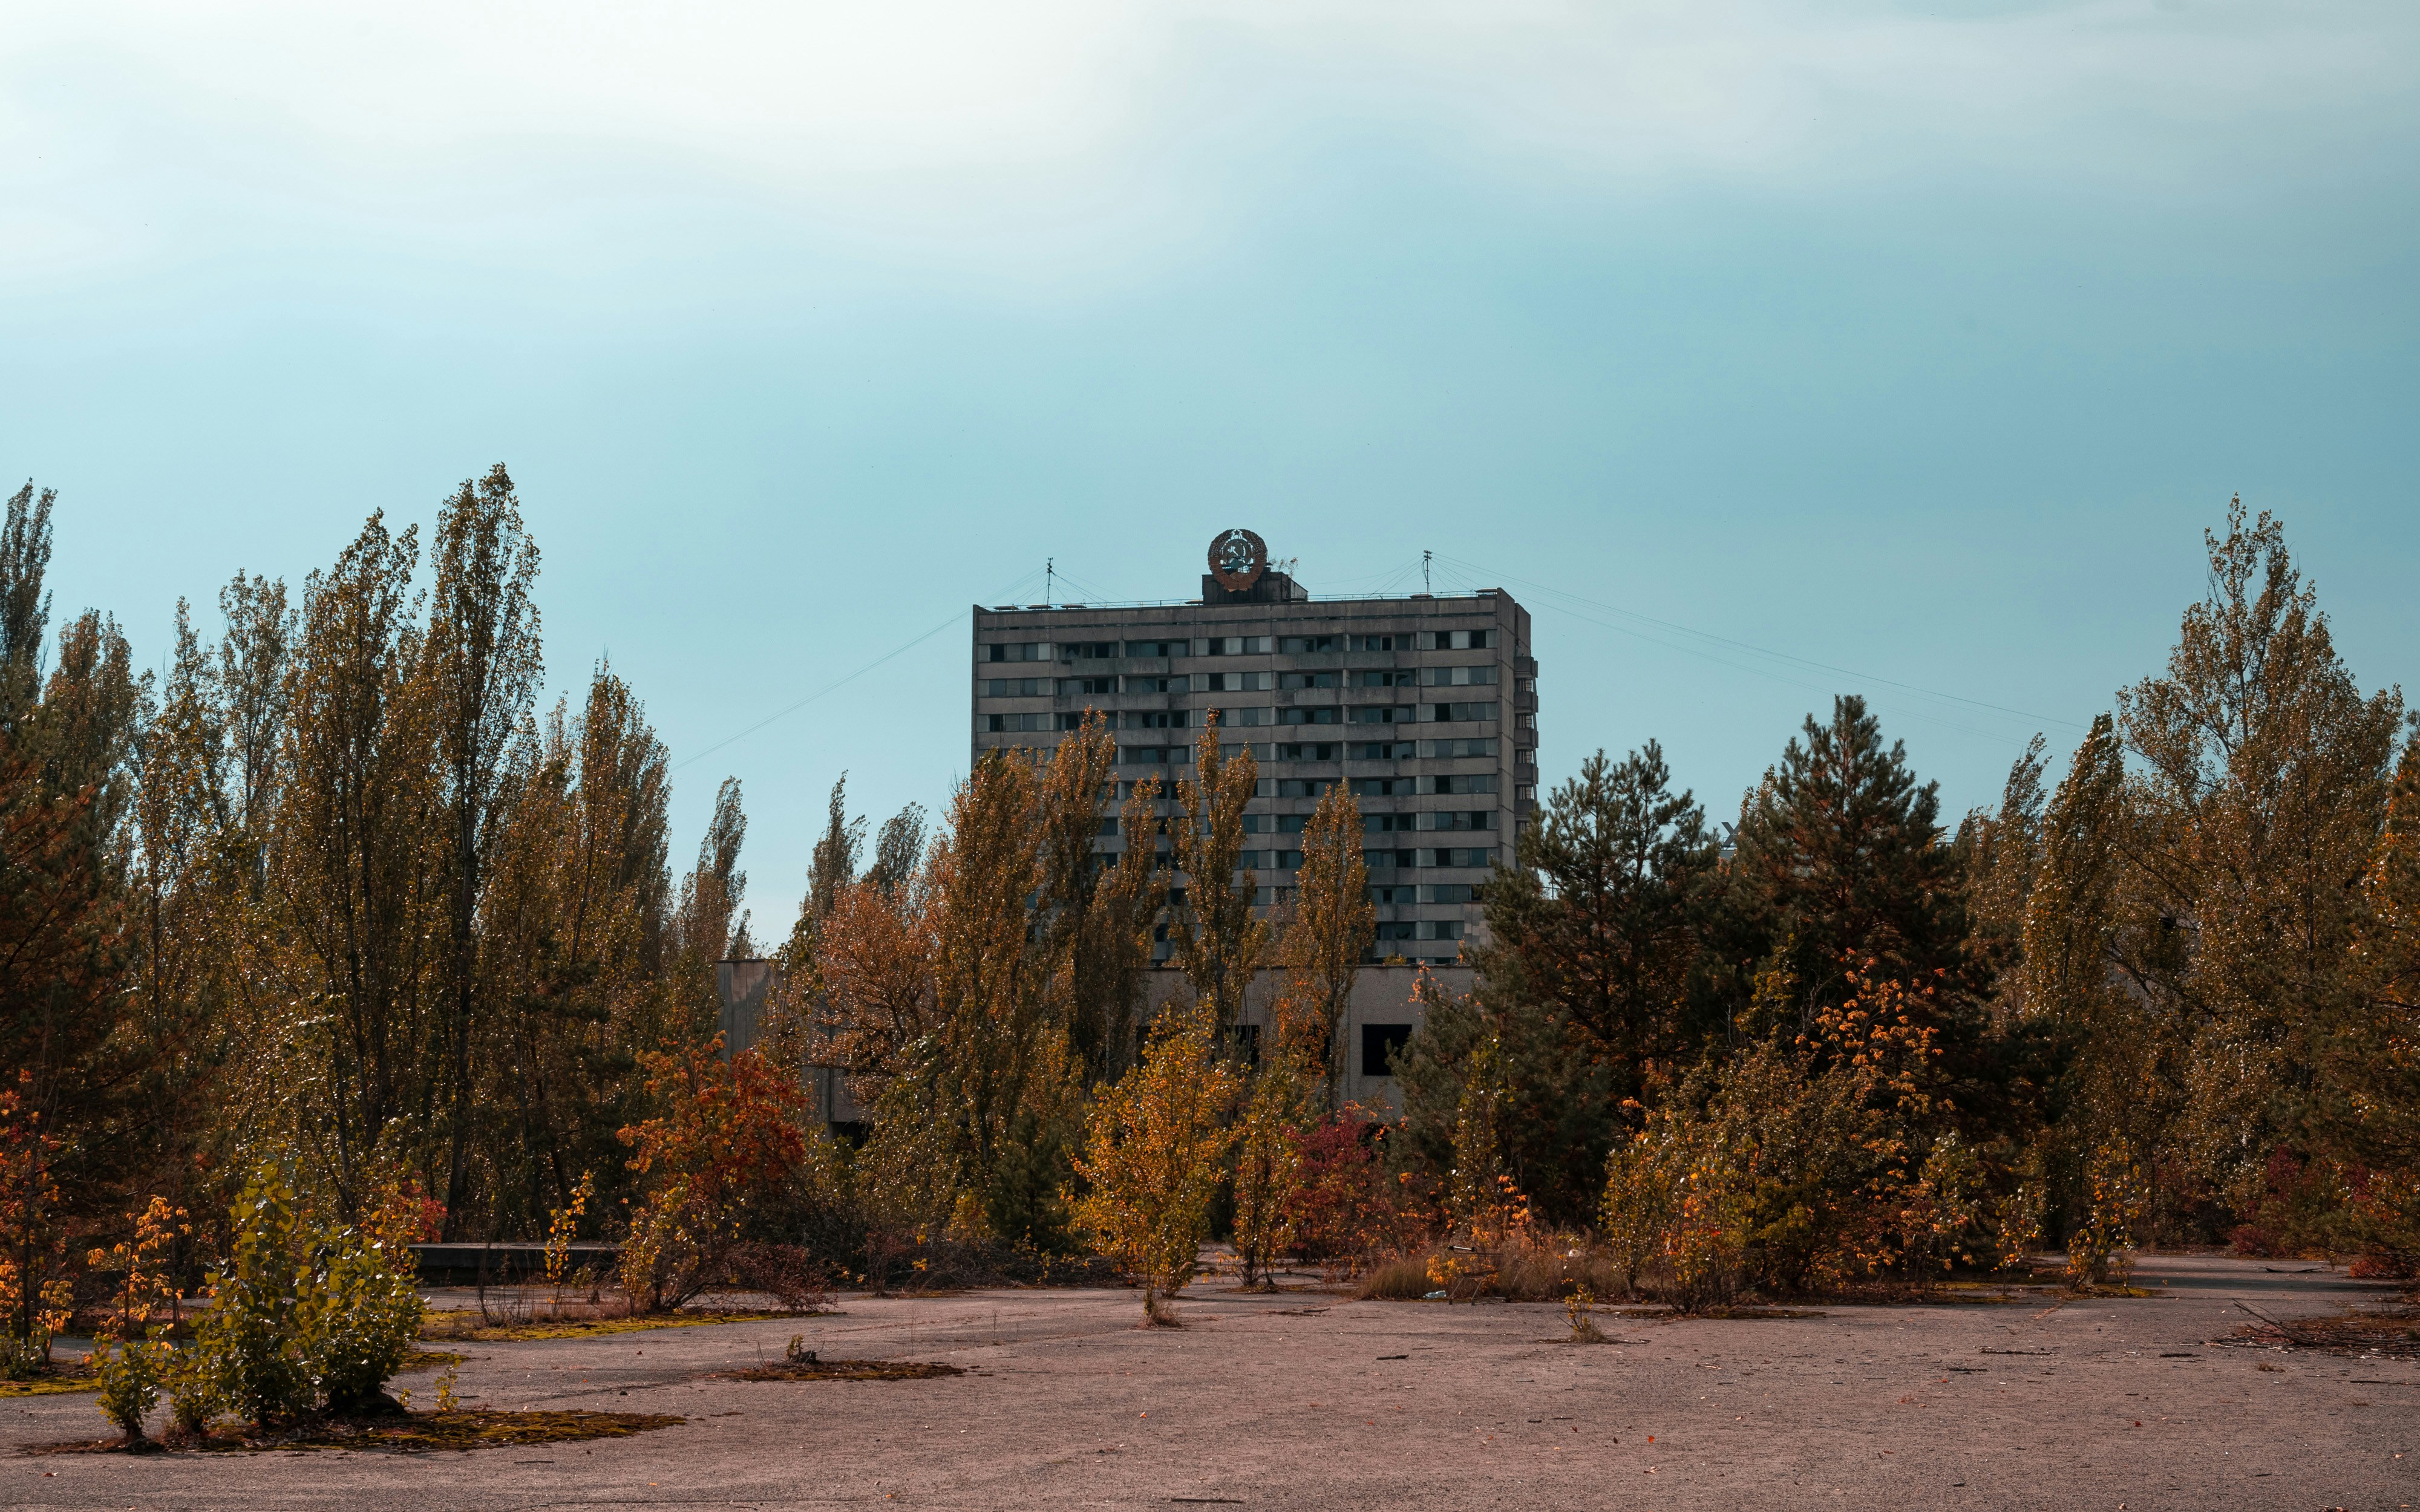 Pripyat city - Chernobyl's Exclusion Zone / Ukraine - October, 2020. The day trip from the Chernobyl city to Prypiat